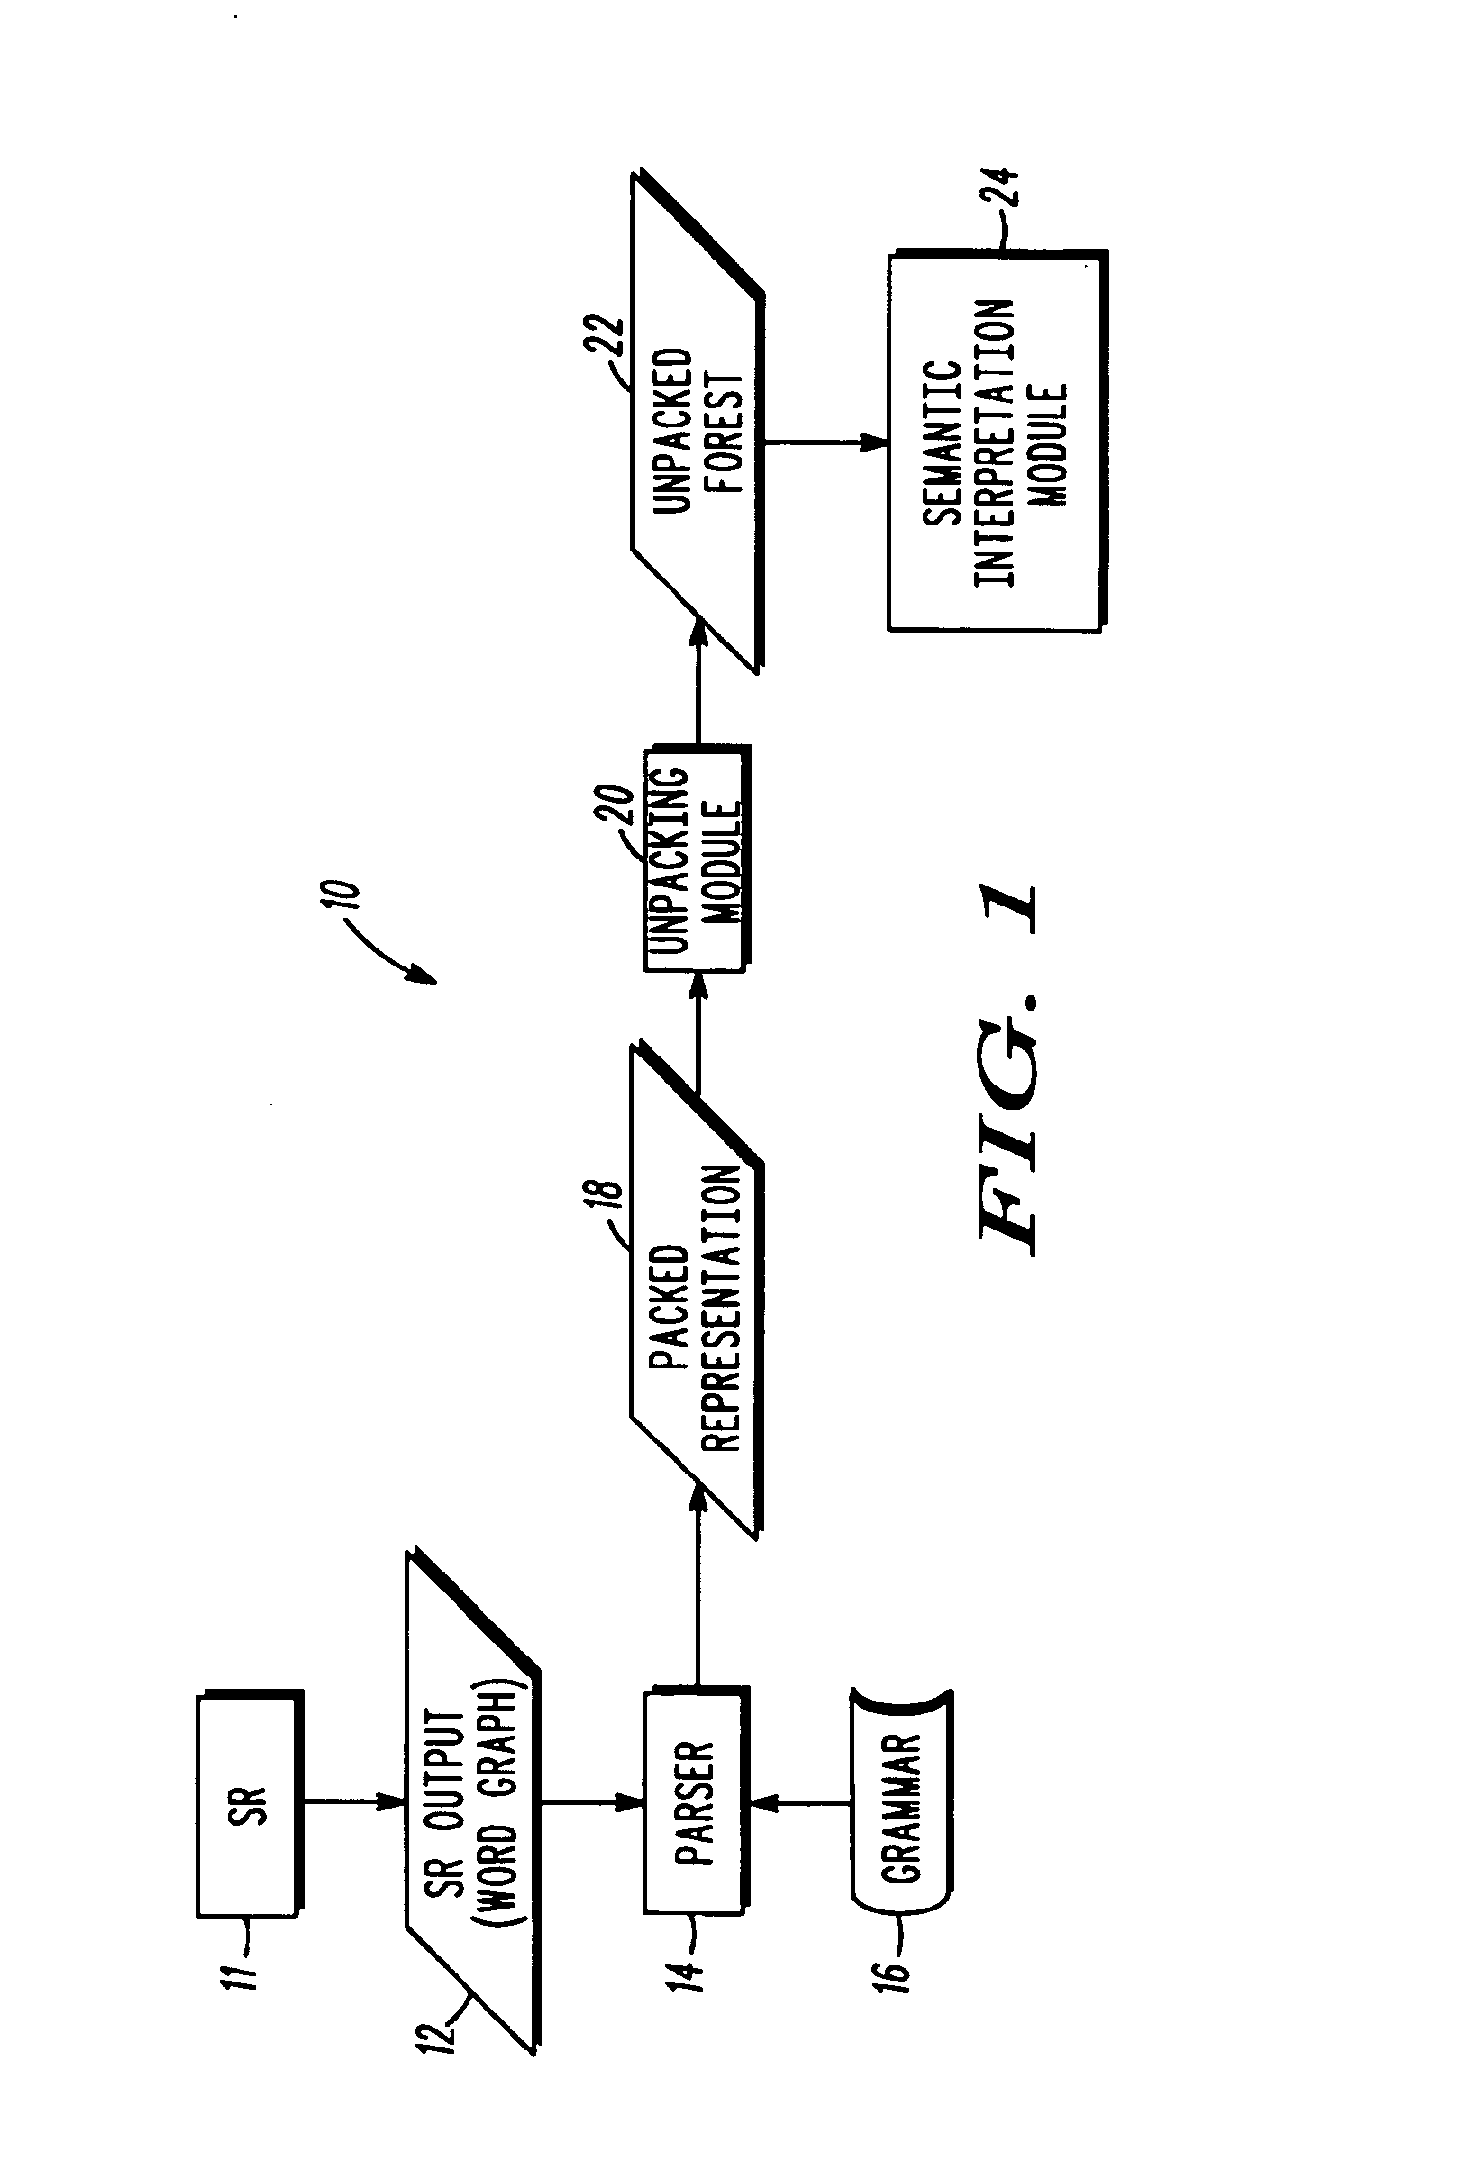 System and method of decoding a packed representation of multiple parses